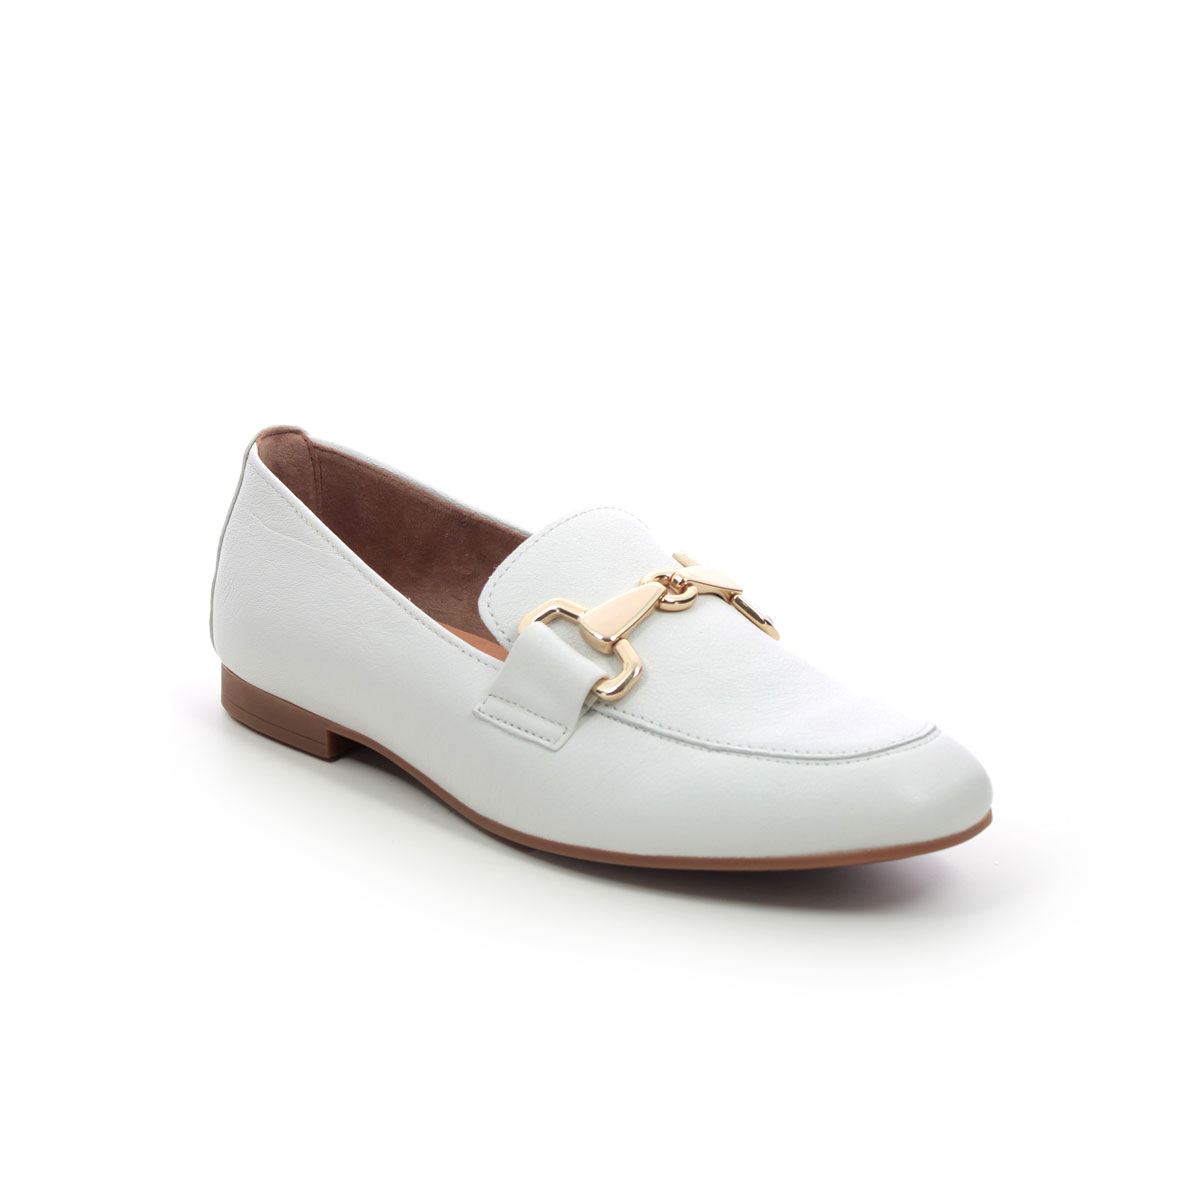 Gabor Jangle Viva Off White Womens loafers 25.211.20 in a Plain Leather in Size 4